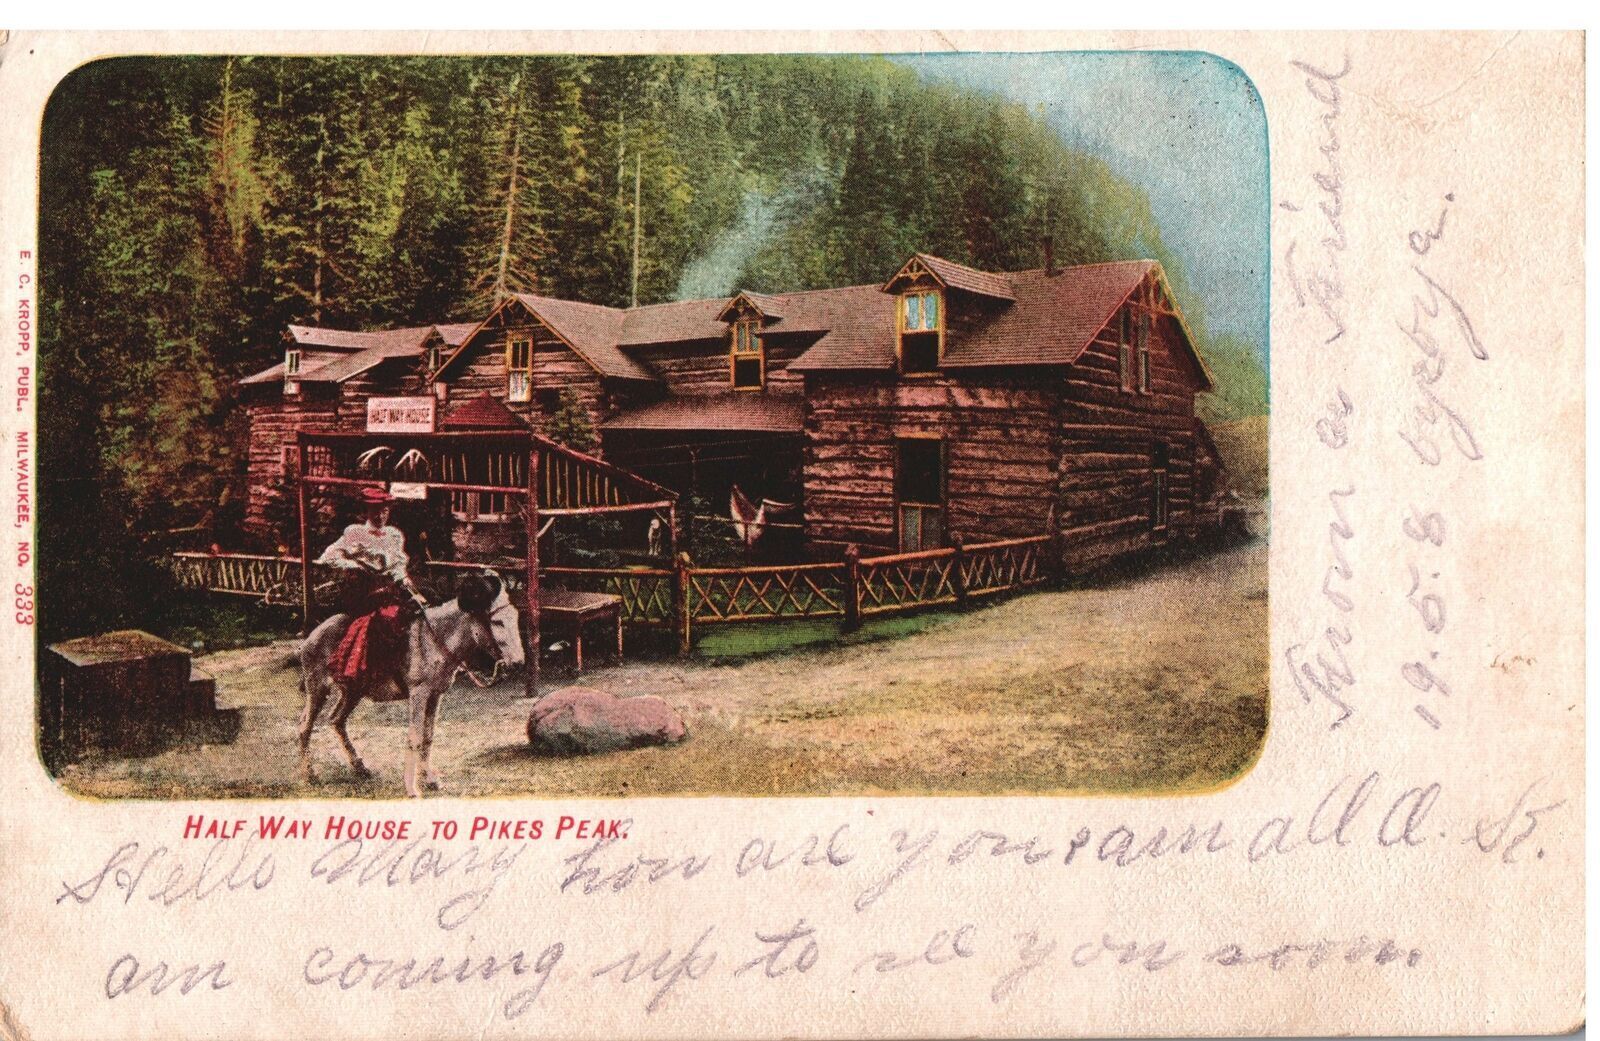 VINTAGE POSTCARD WOODEN CABIN HALF WAY HOUSE TO PIKES PEAK MAILED 1908